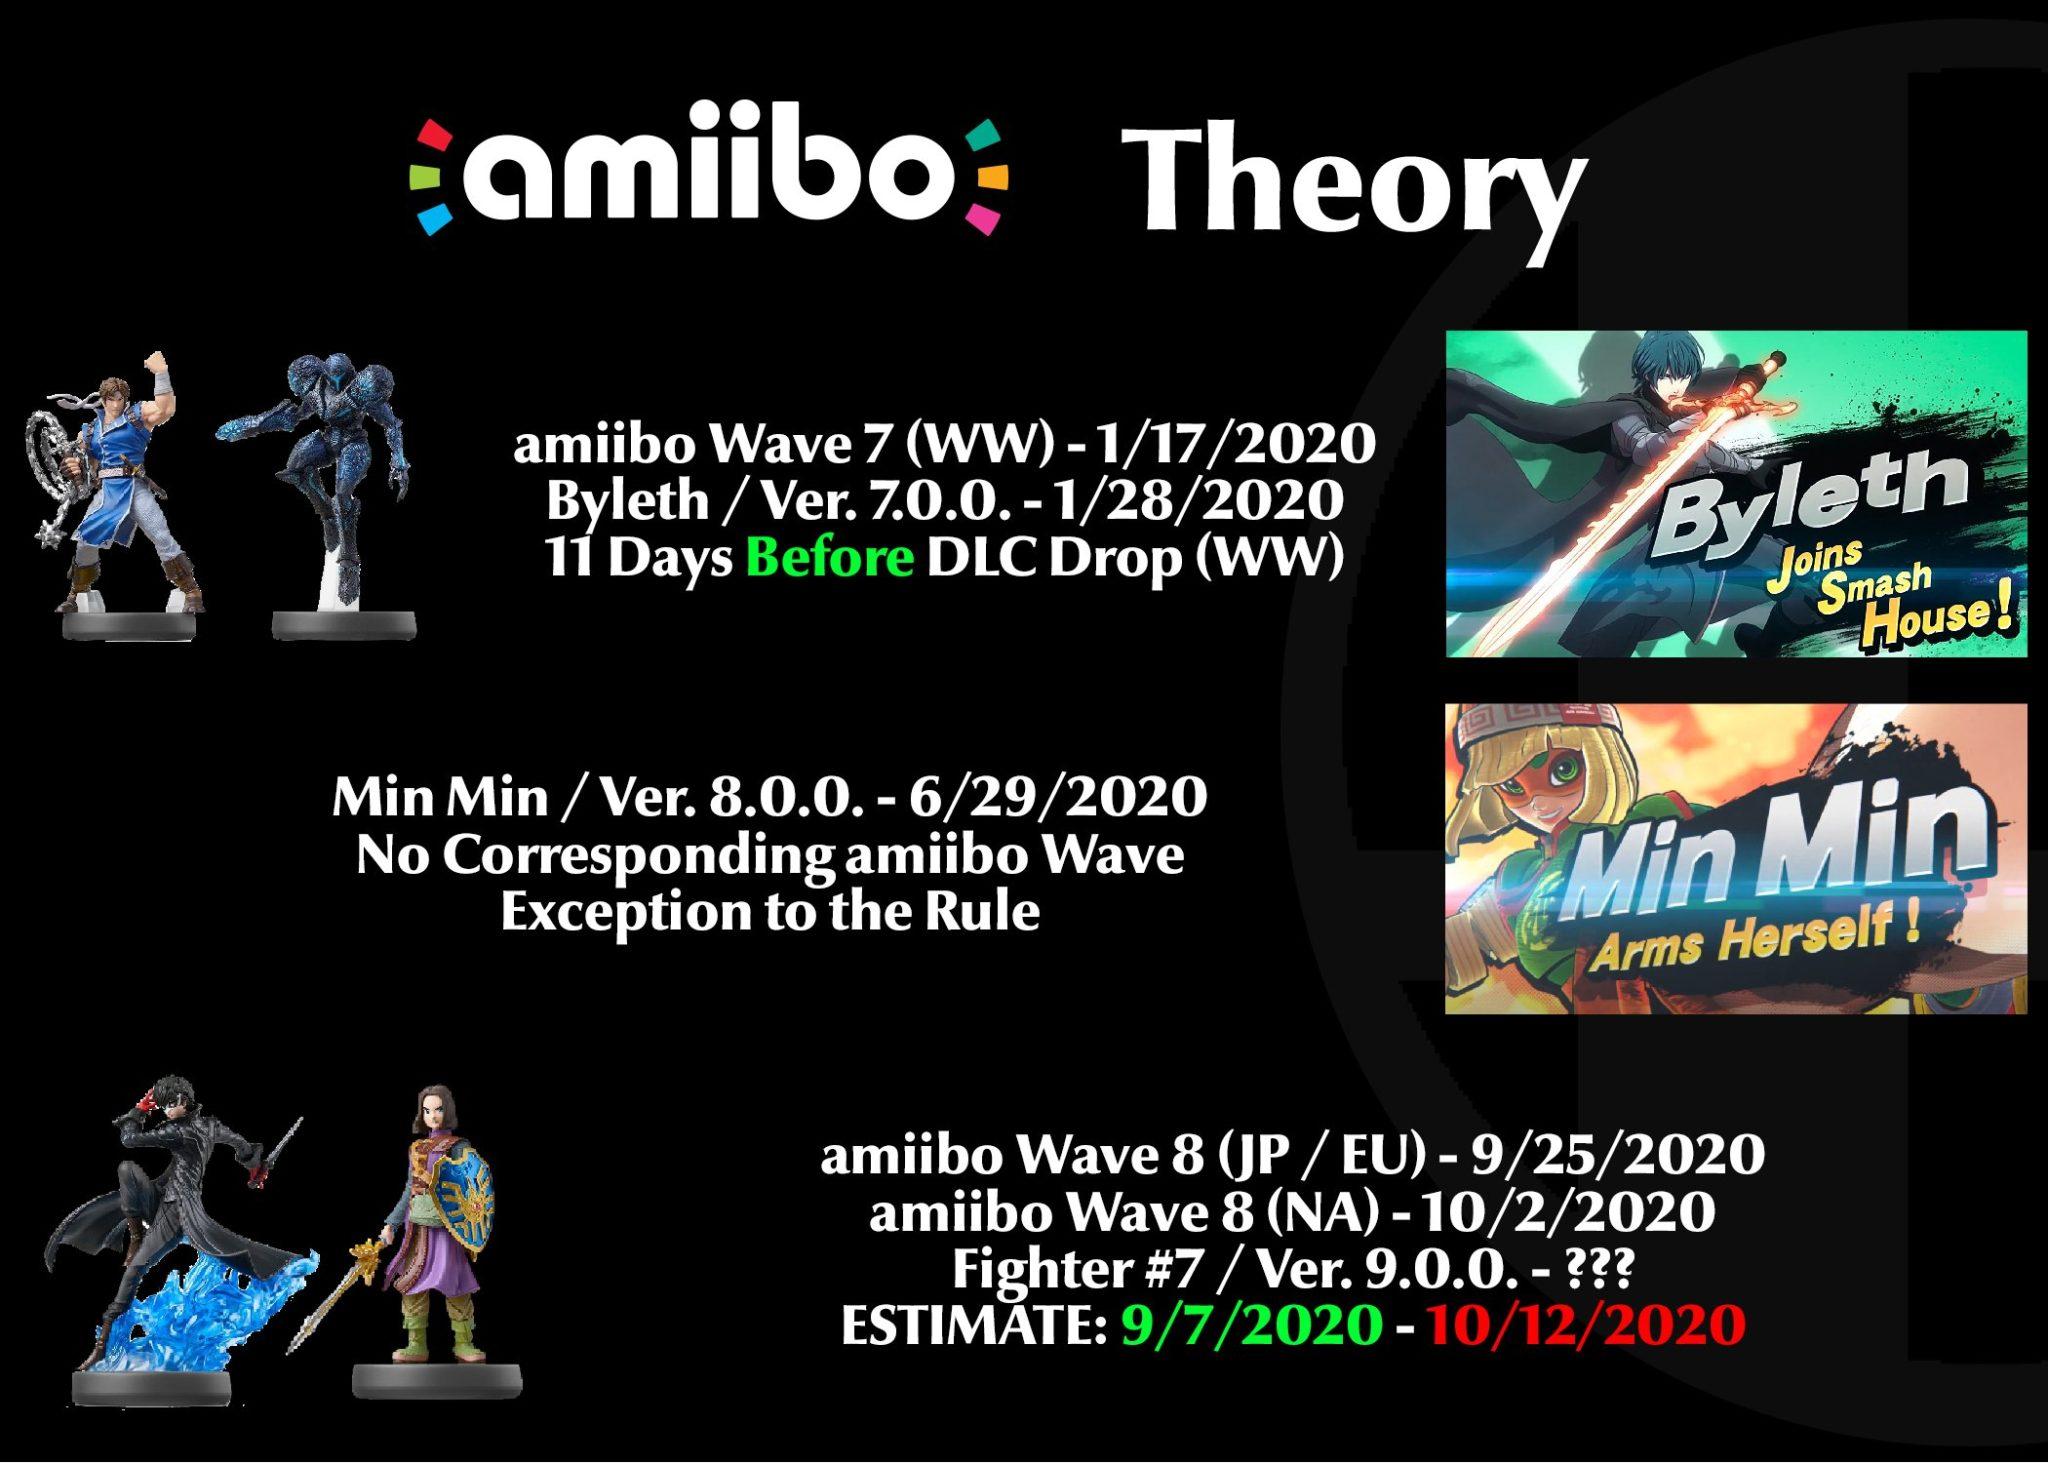 Amiibo Theory suggests a DLC figher coming soon